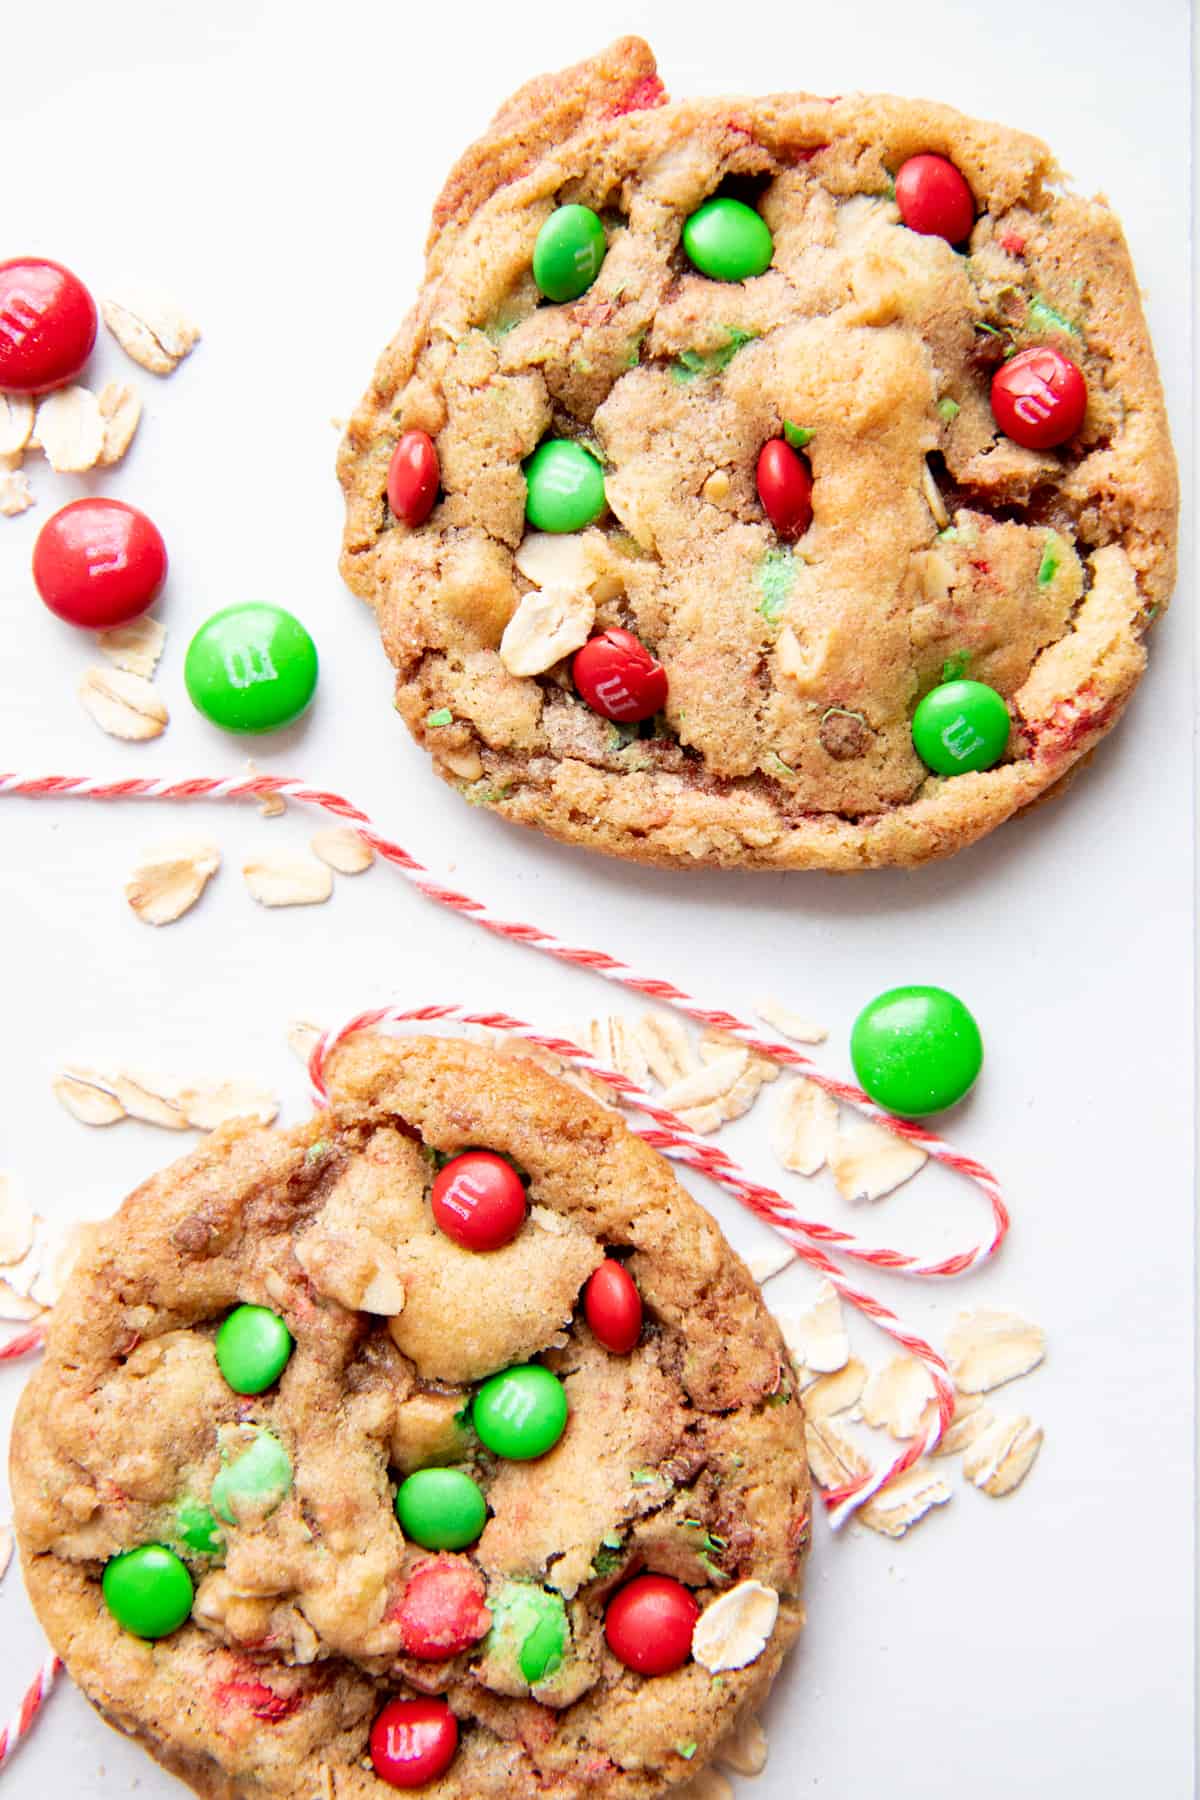 Two cookies dotted with holiday colored M&Ms sit on a white tabletop, surrounded by baker's twine, M&Ms, and rolled oats.